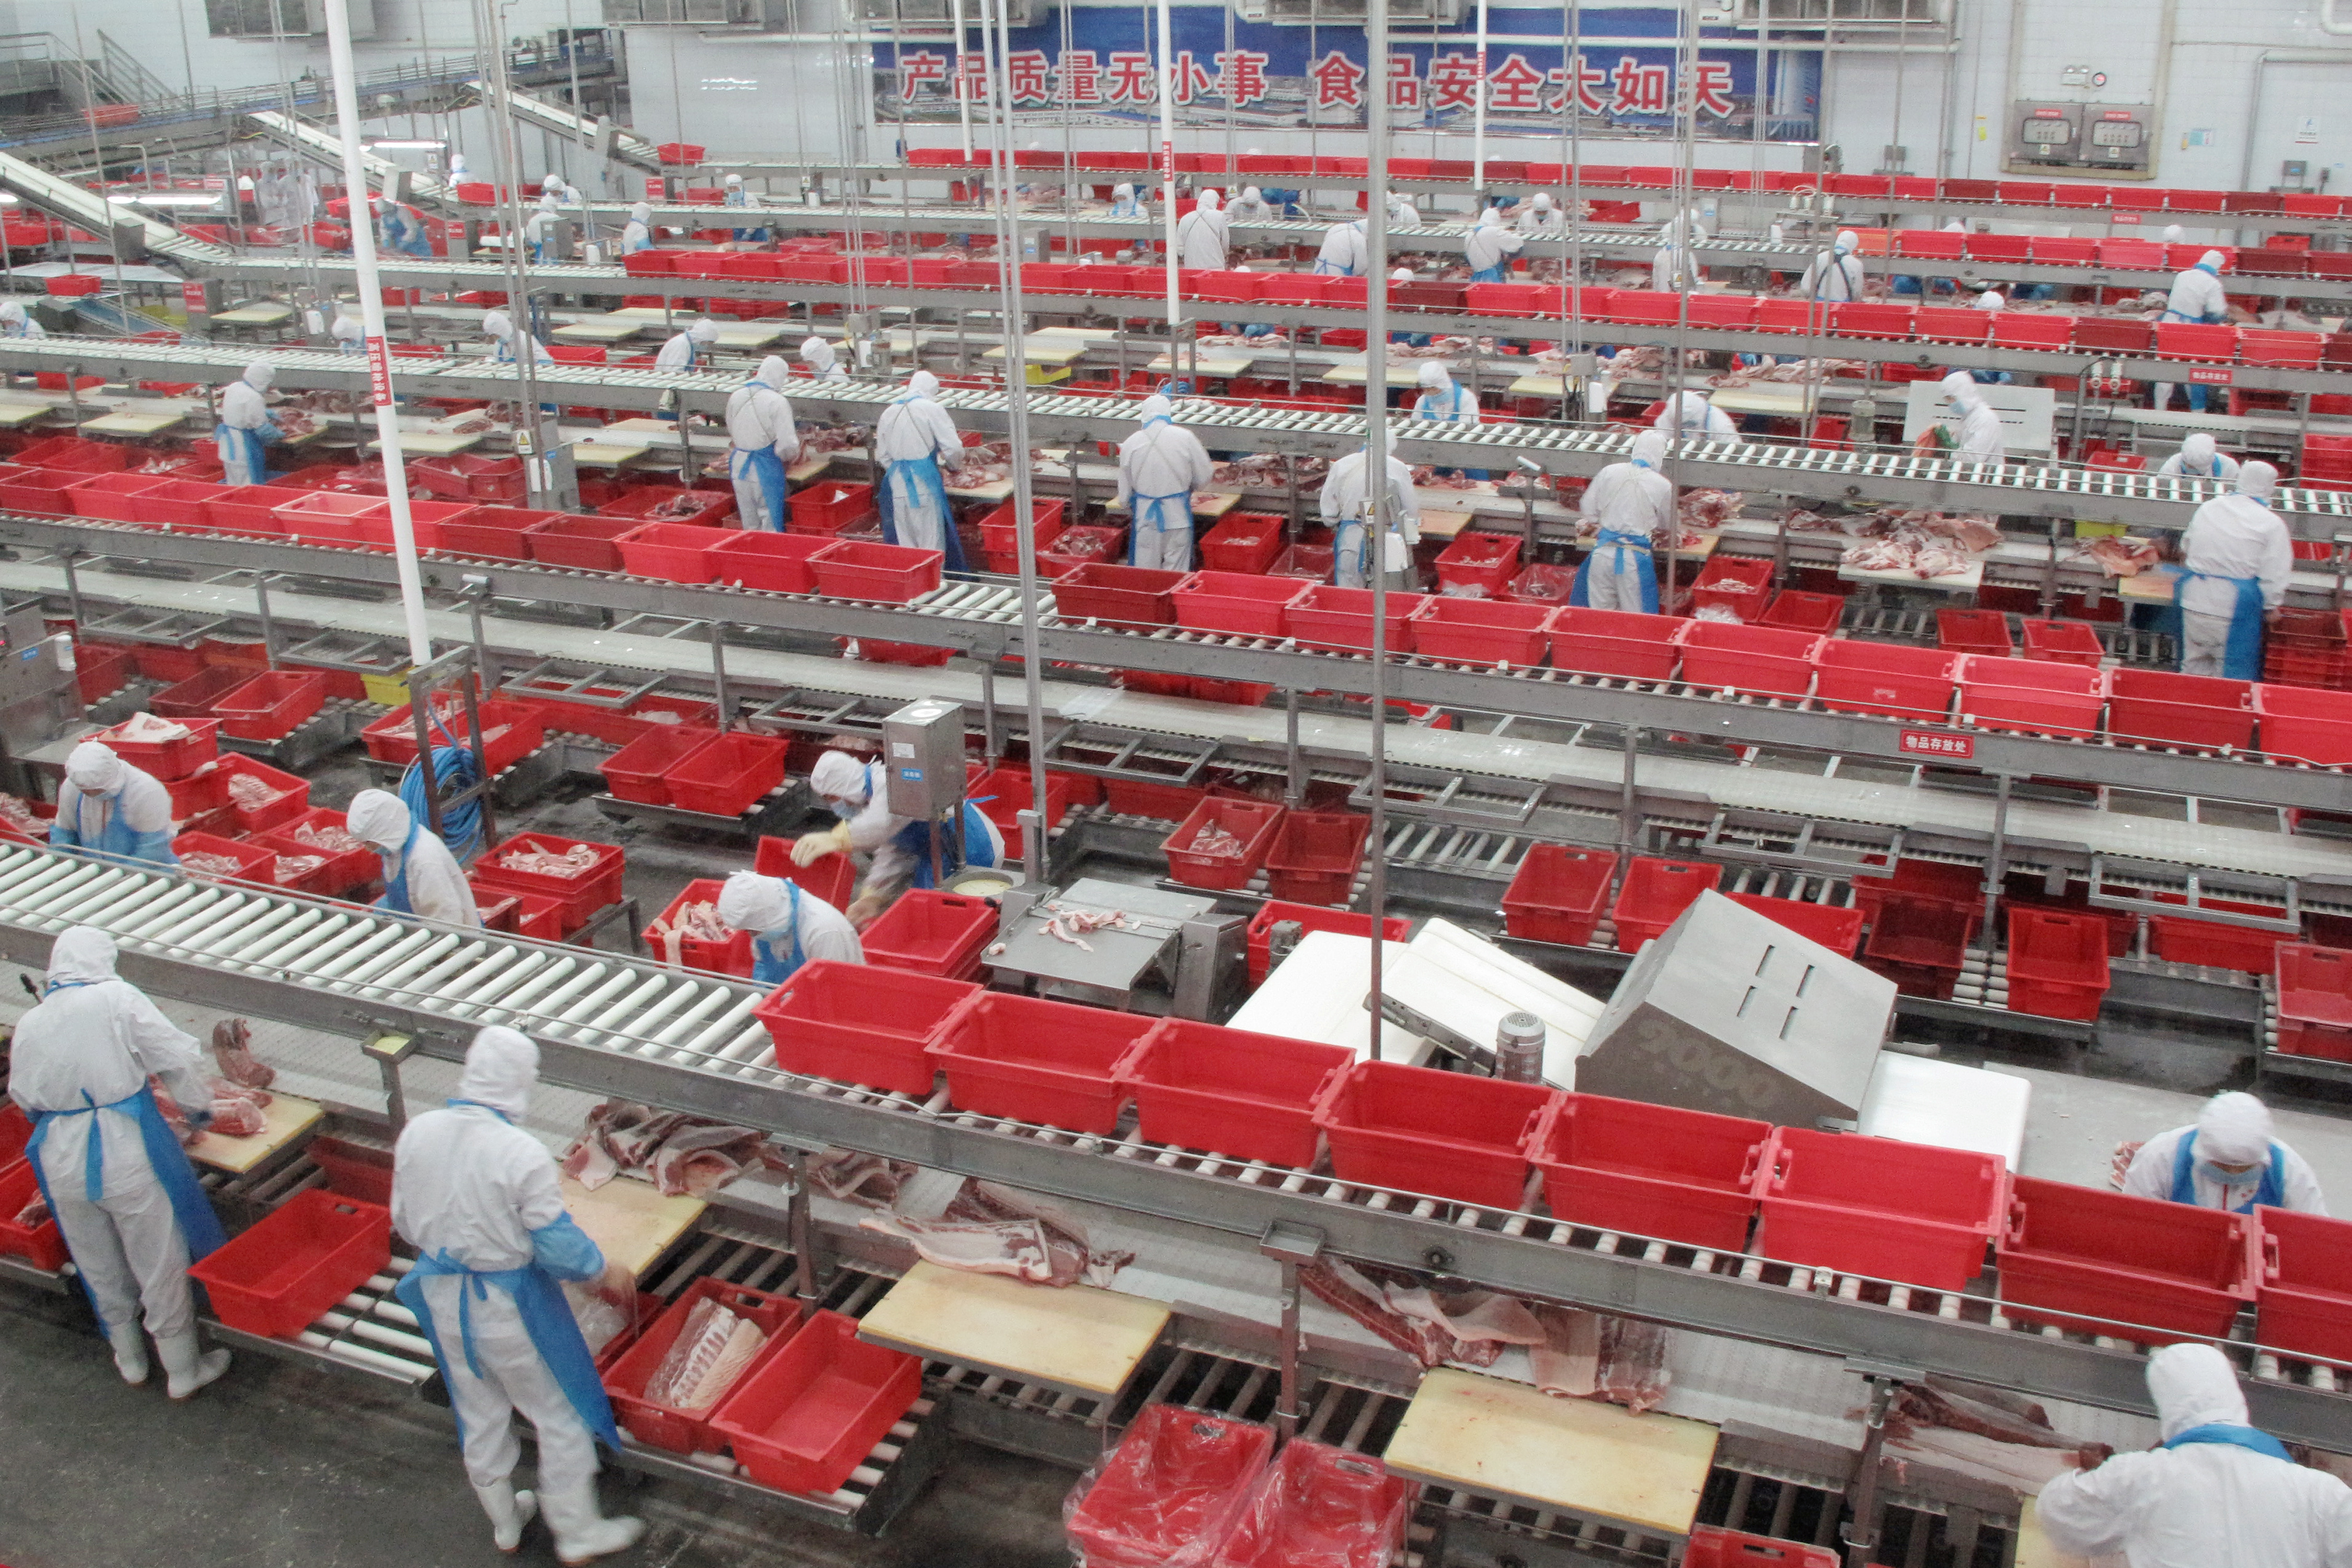 Workers sort cuts of fresh pork in a processing plant of pork producer WH Group in Zhengzhou